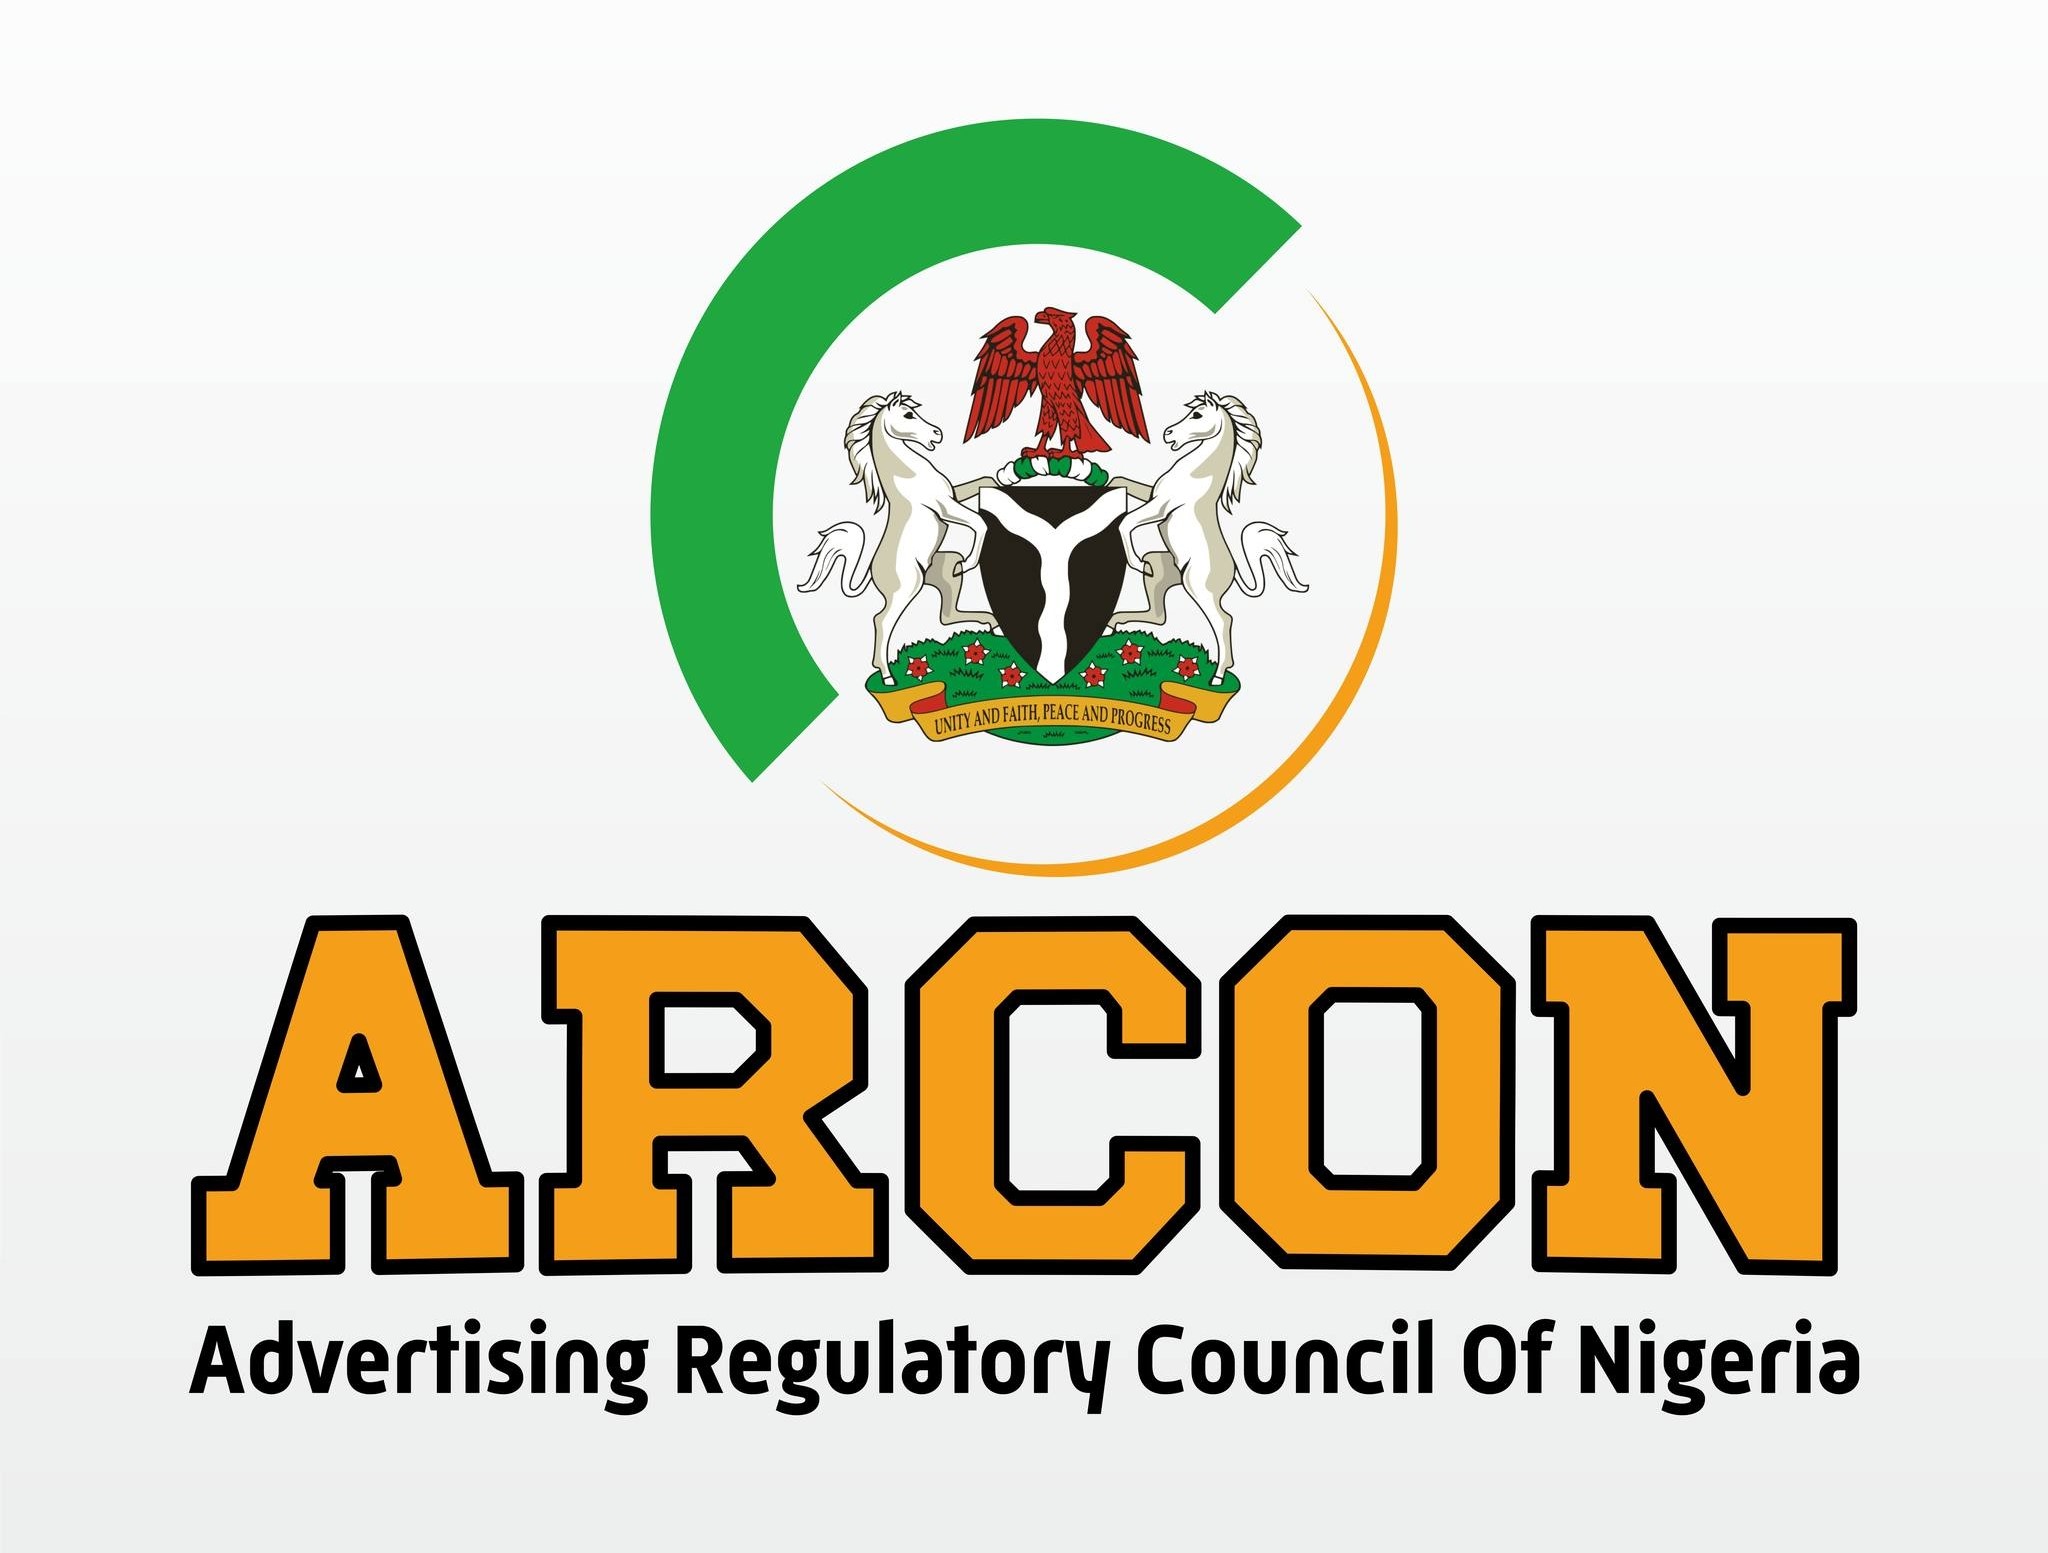 ARCON advocates synergy between academia and professionals